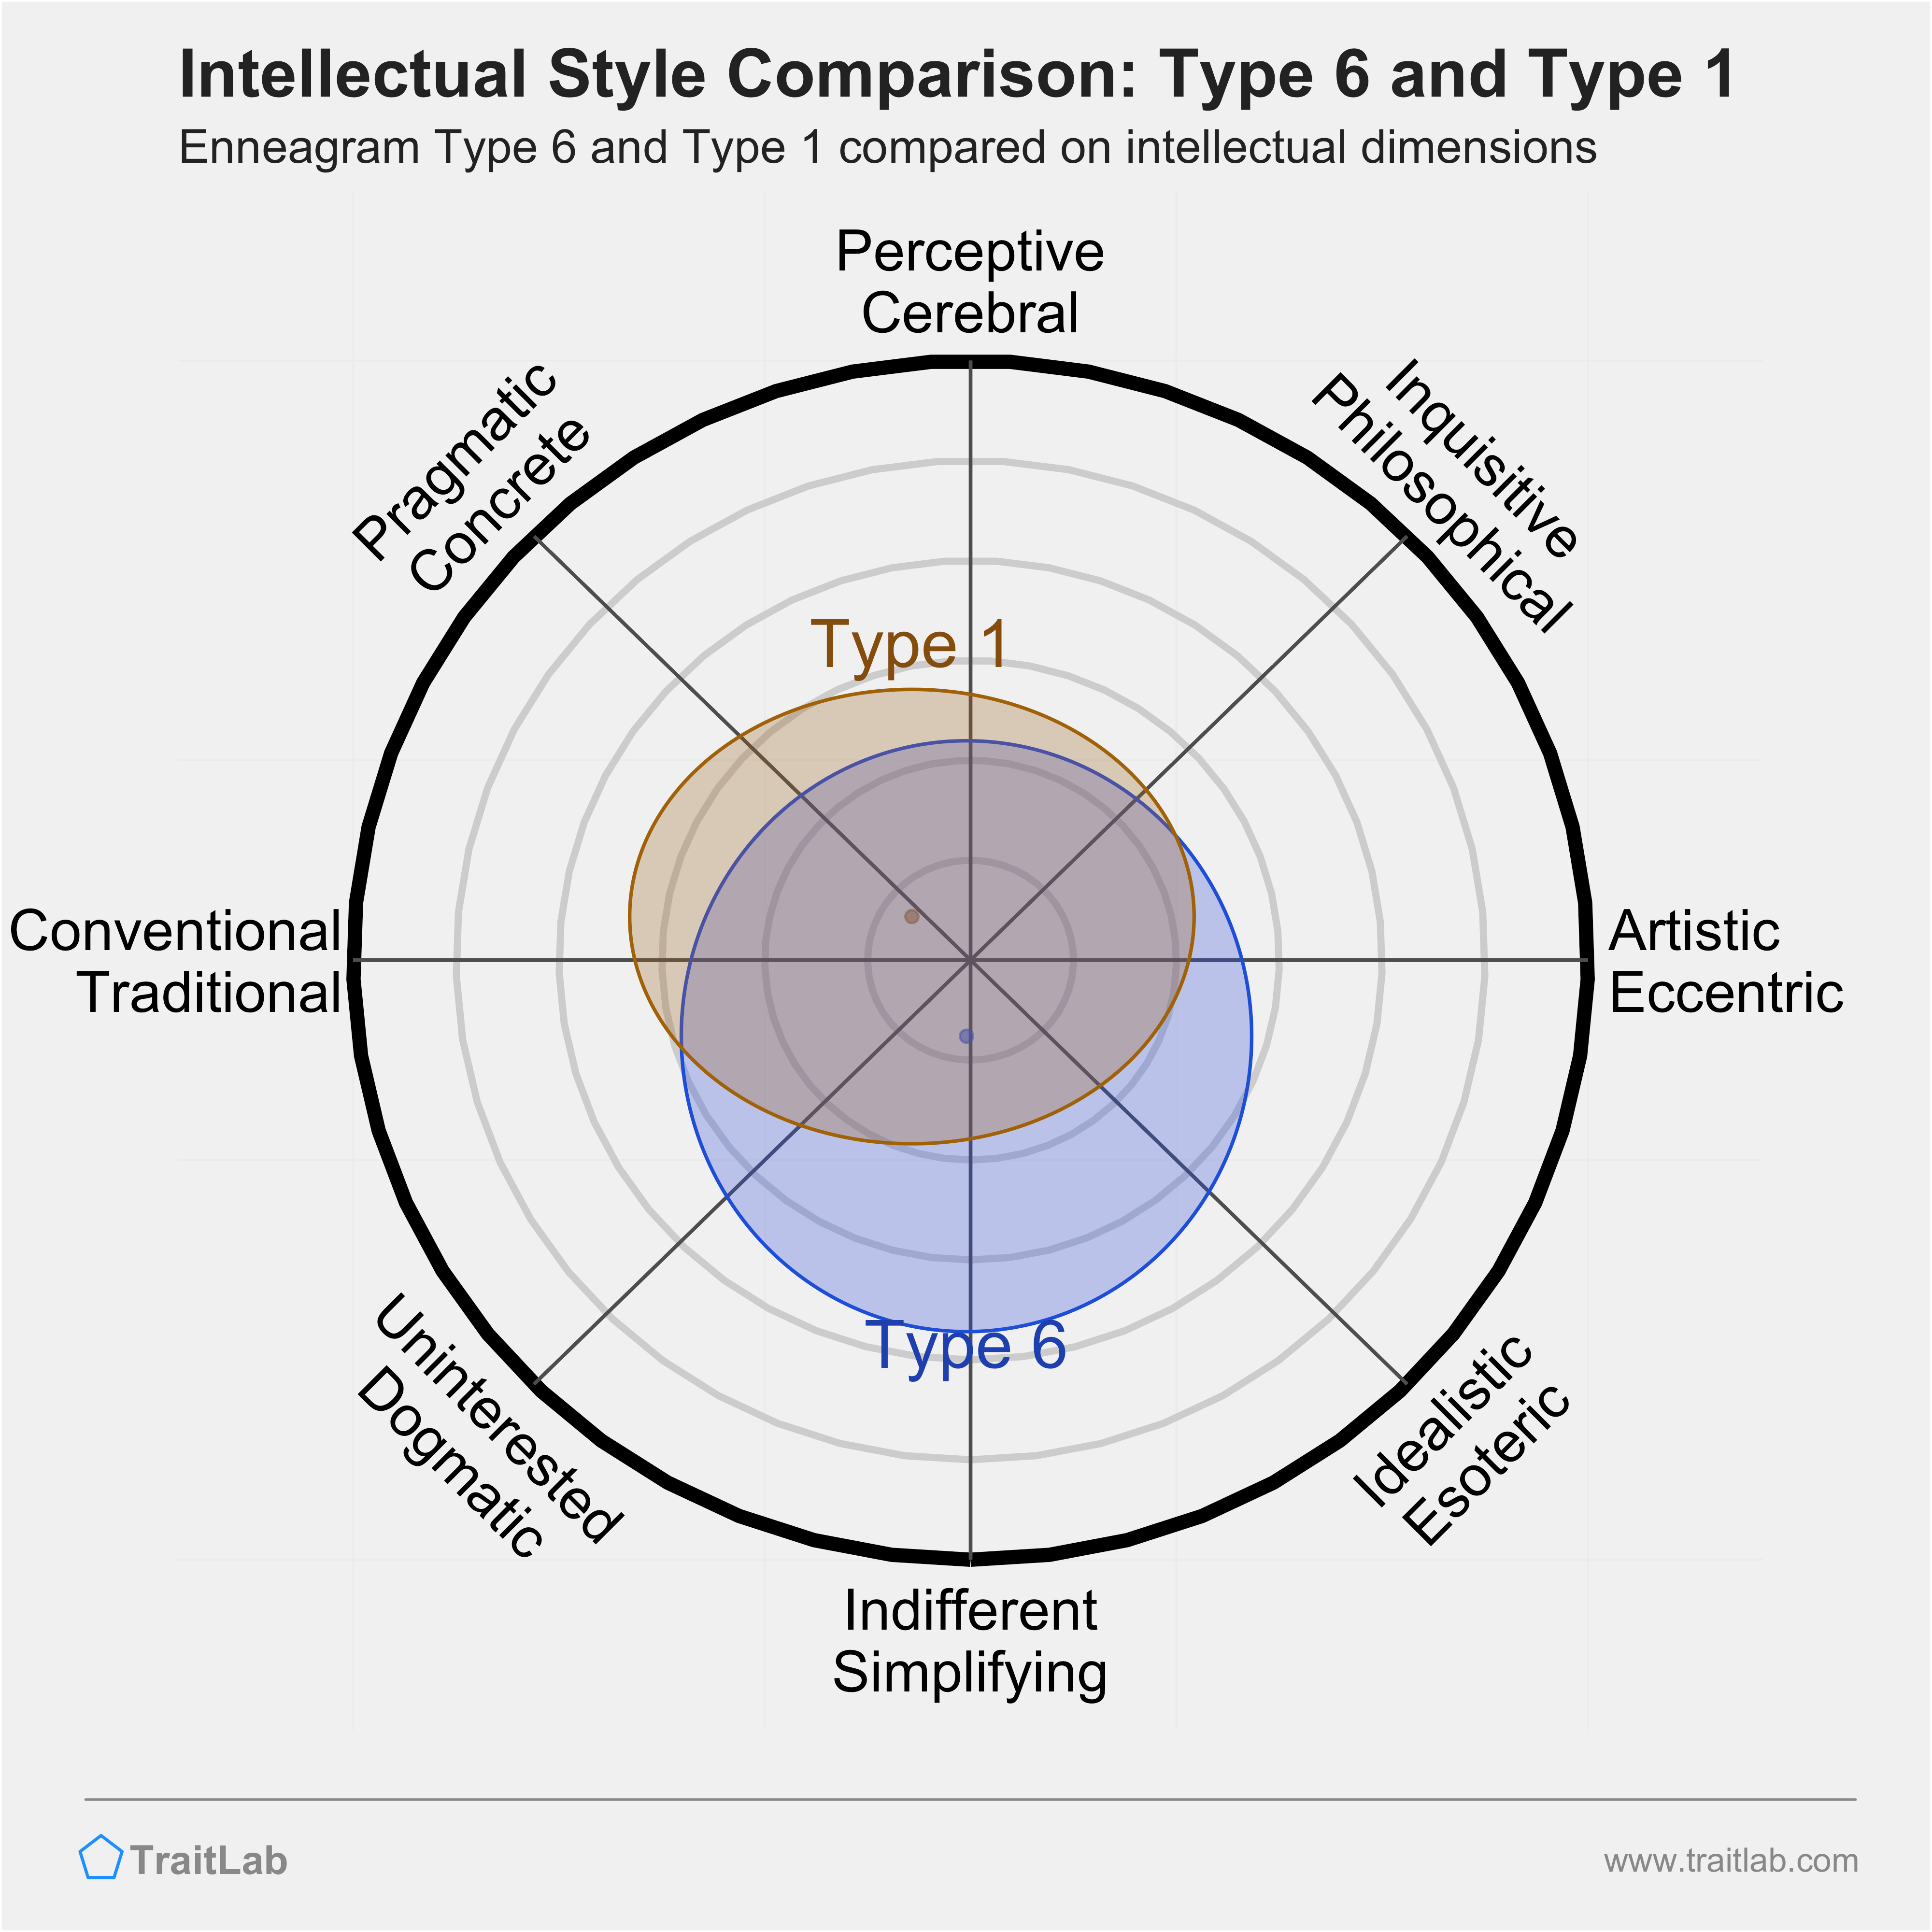 Type 6 and Type 1 comparison across intellectual dimensions